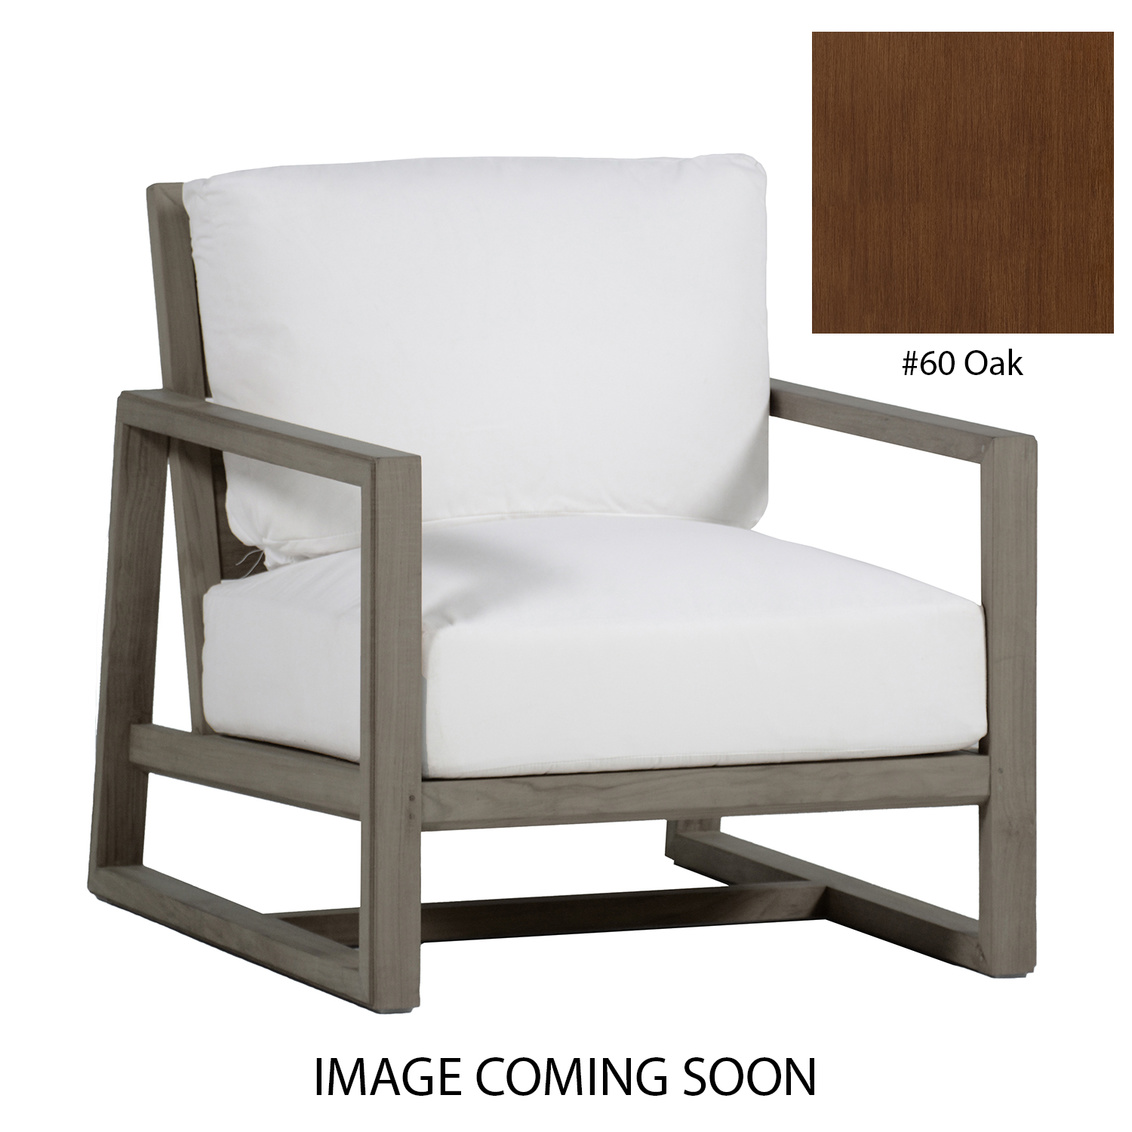 avondale aluminum lounge chair in oak – frame only product image